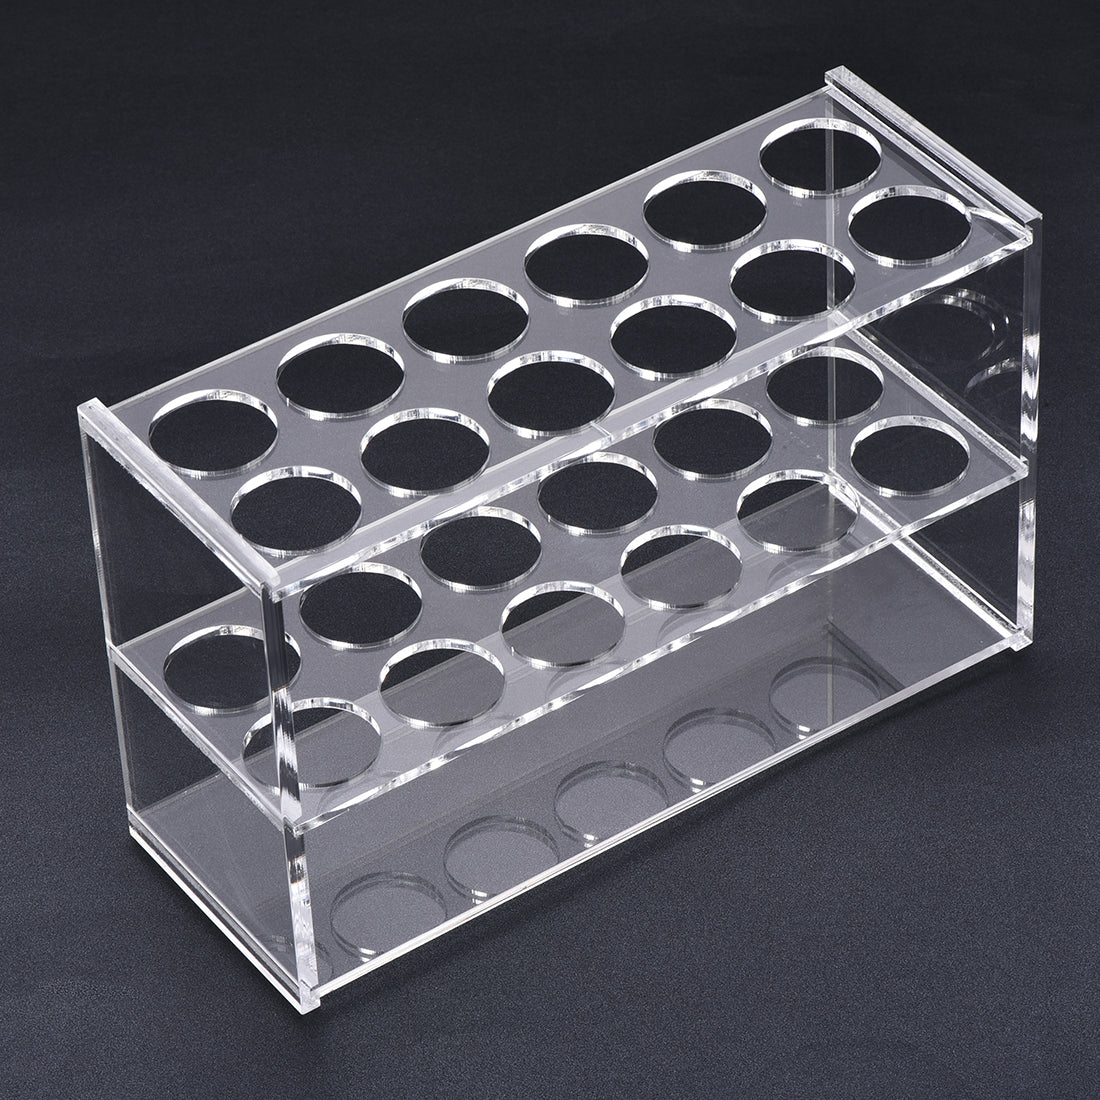 uxcell Uxcell Acrylic Test Tube Holder Rack 2x6 Wells for Centrifuge Tubes Clear